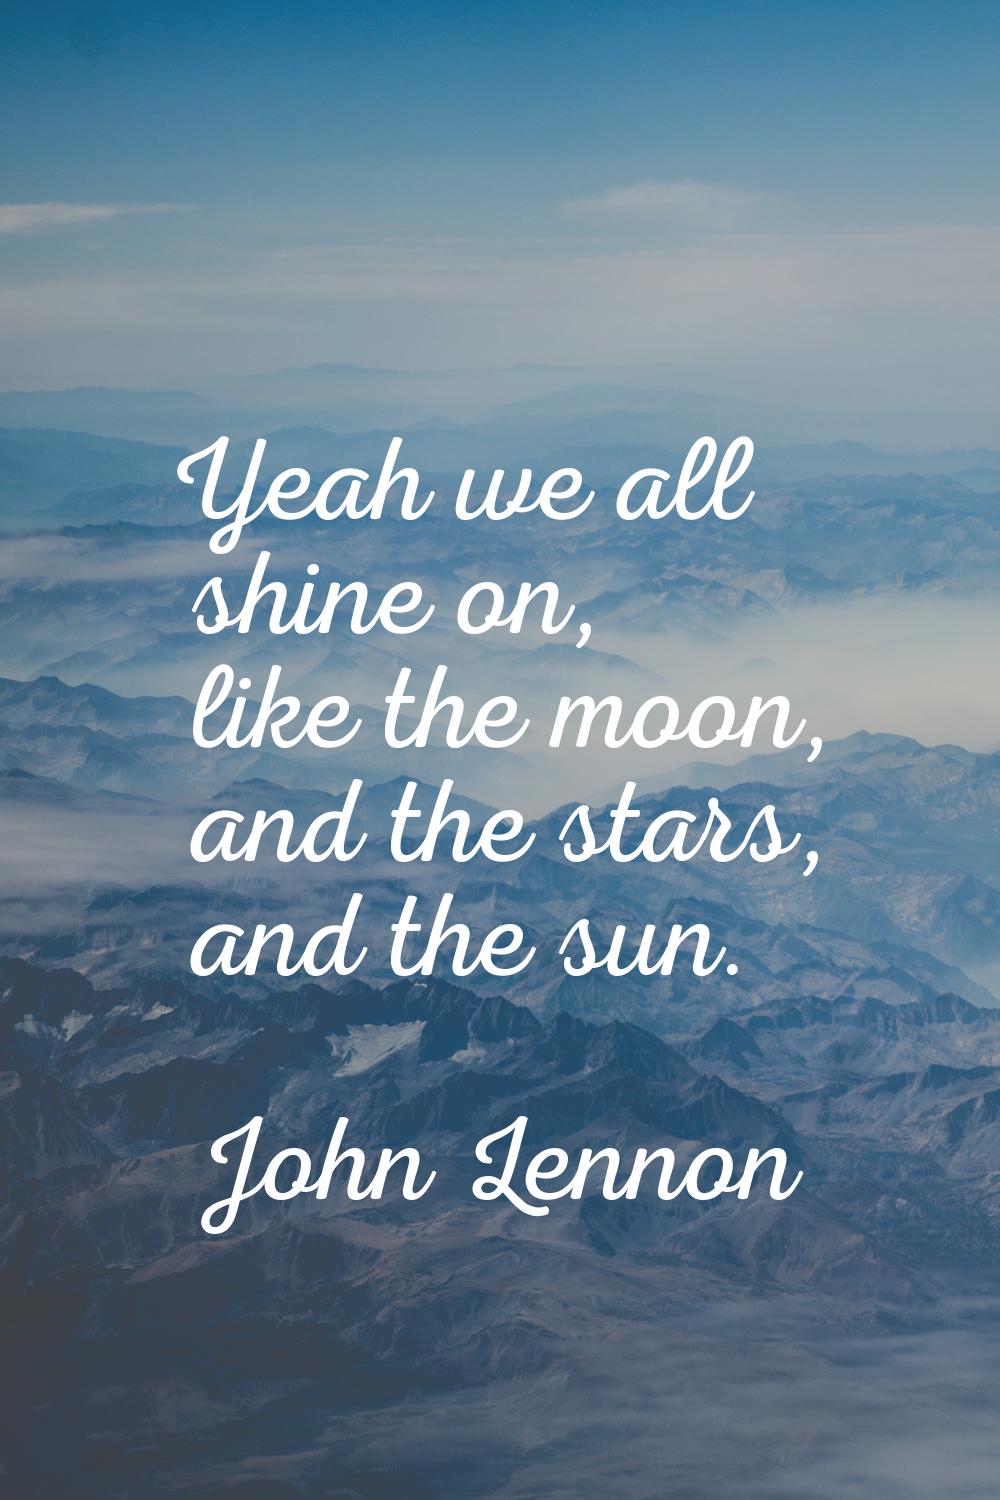 Yeah we all shine on, like the moon, and the stars, and the sun.